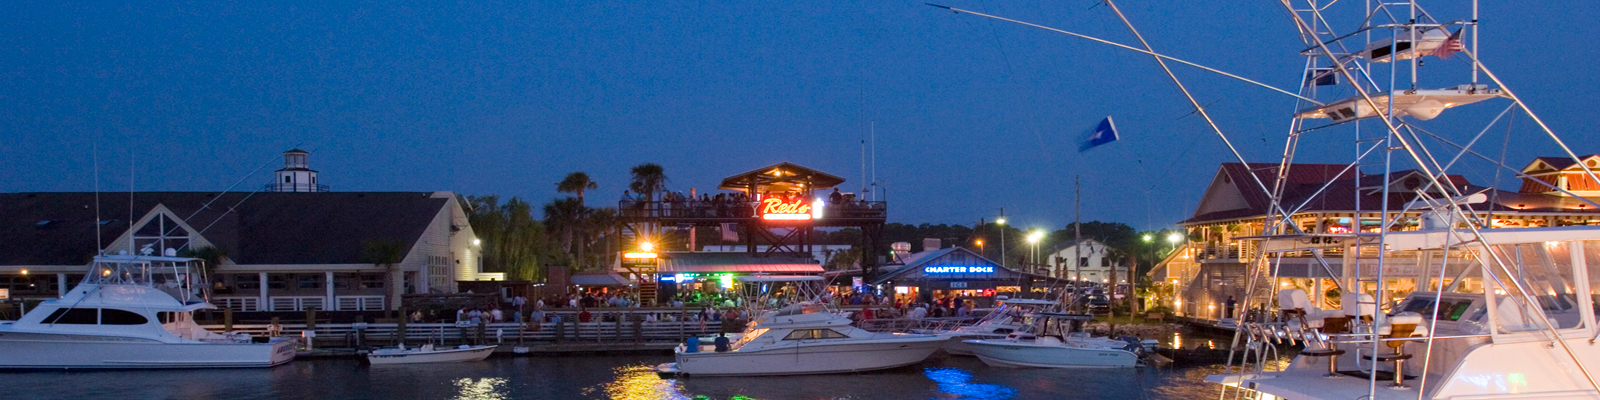 Top Dock & Dines in the United States